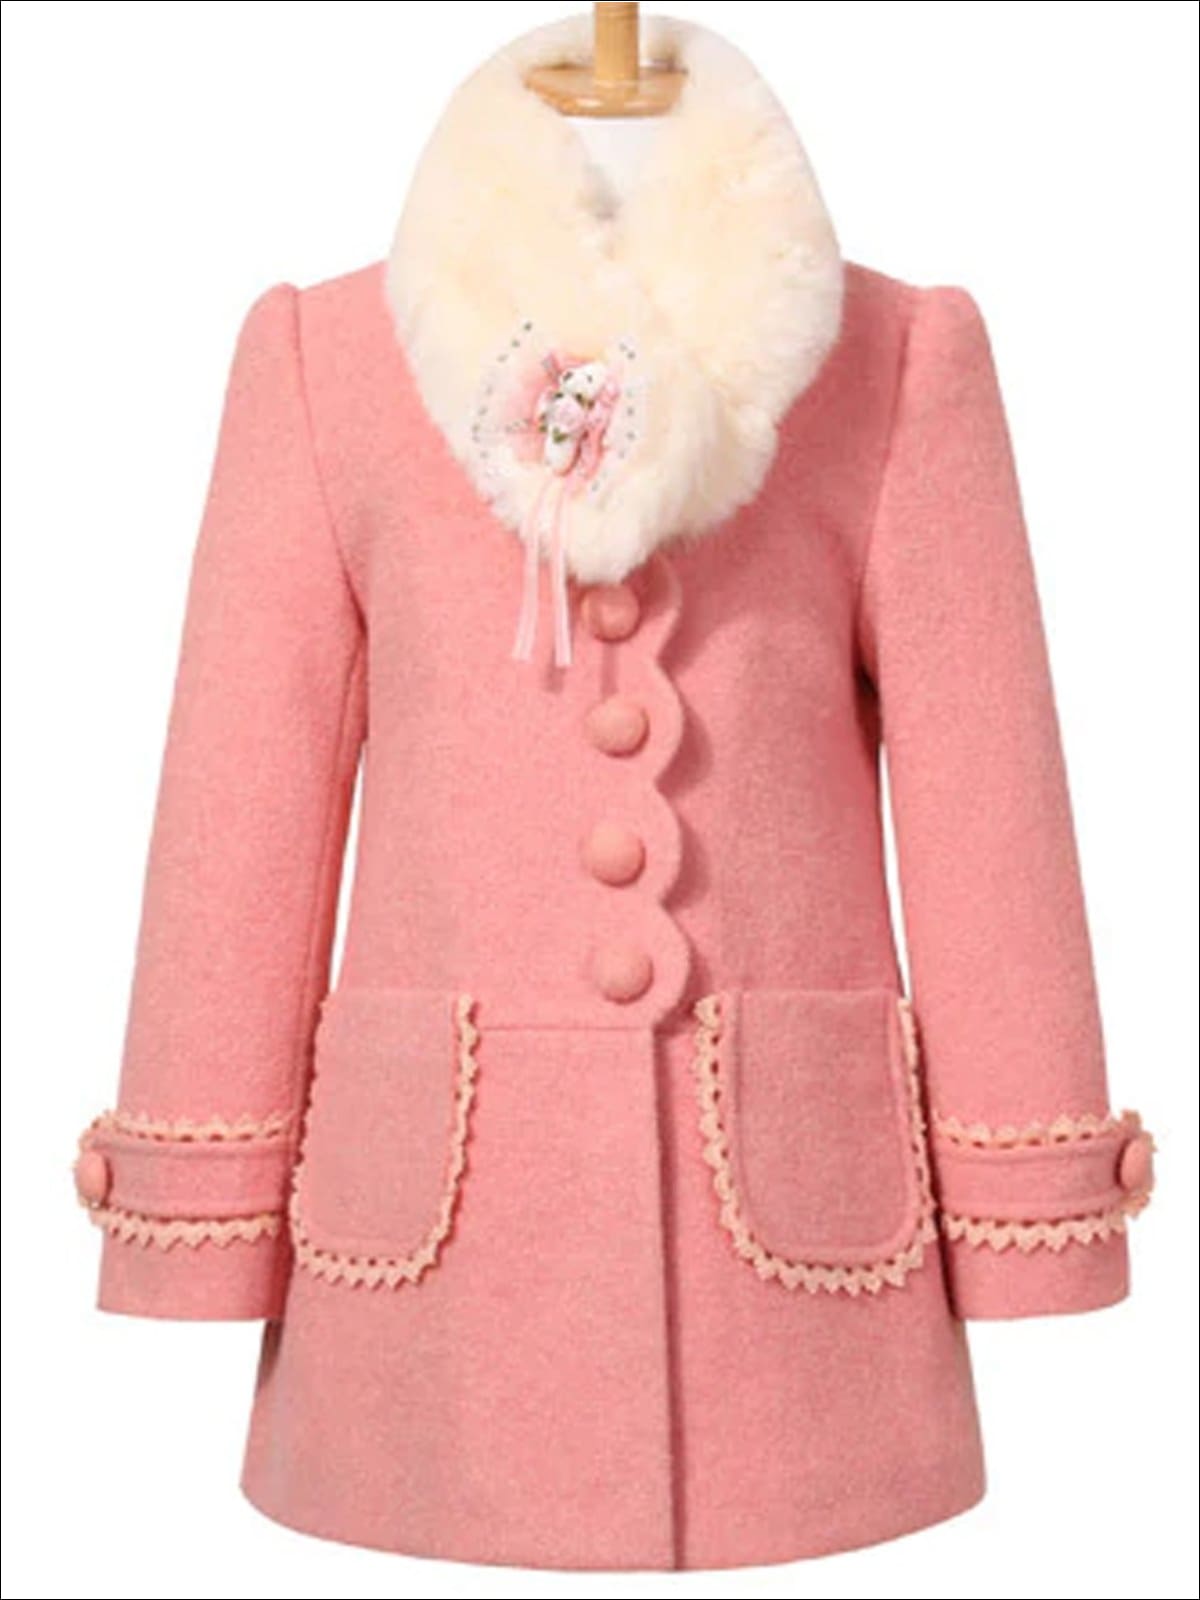 Girls Scalloped Lace Trimmed Fall Coat with Faux Fur Collar (Pink & Red) - Girls Jacket